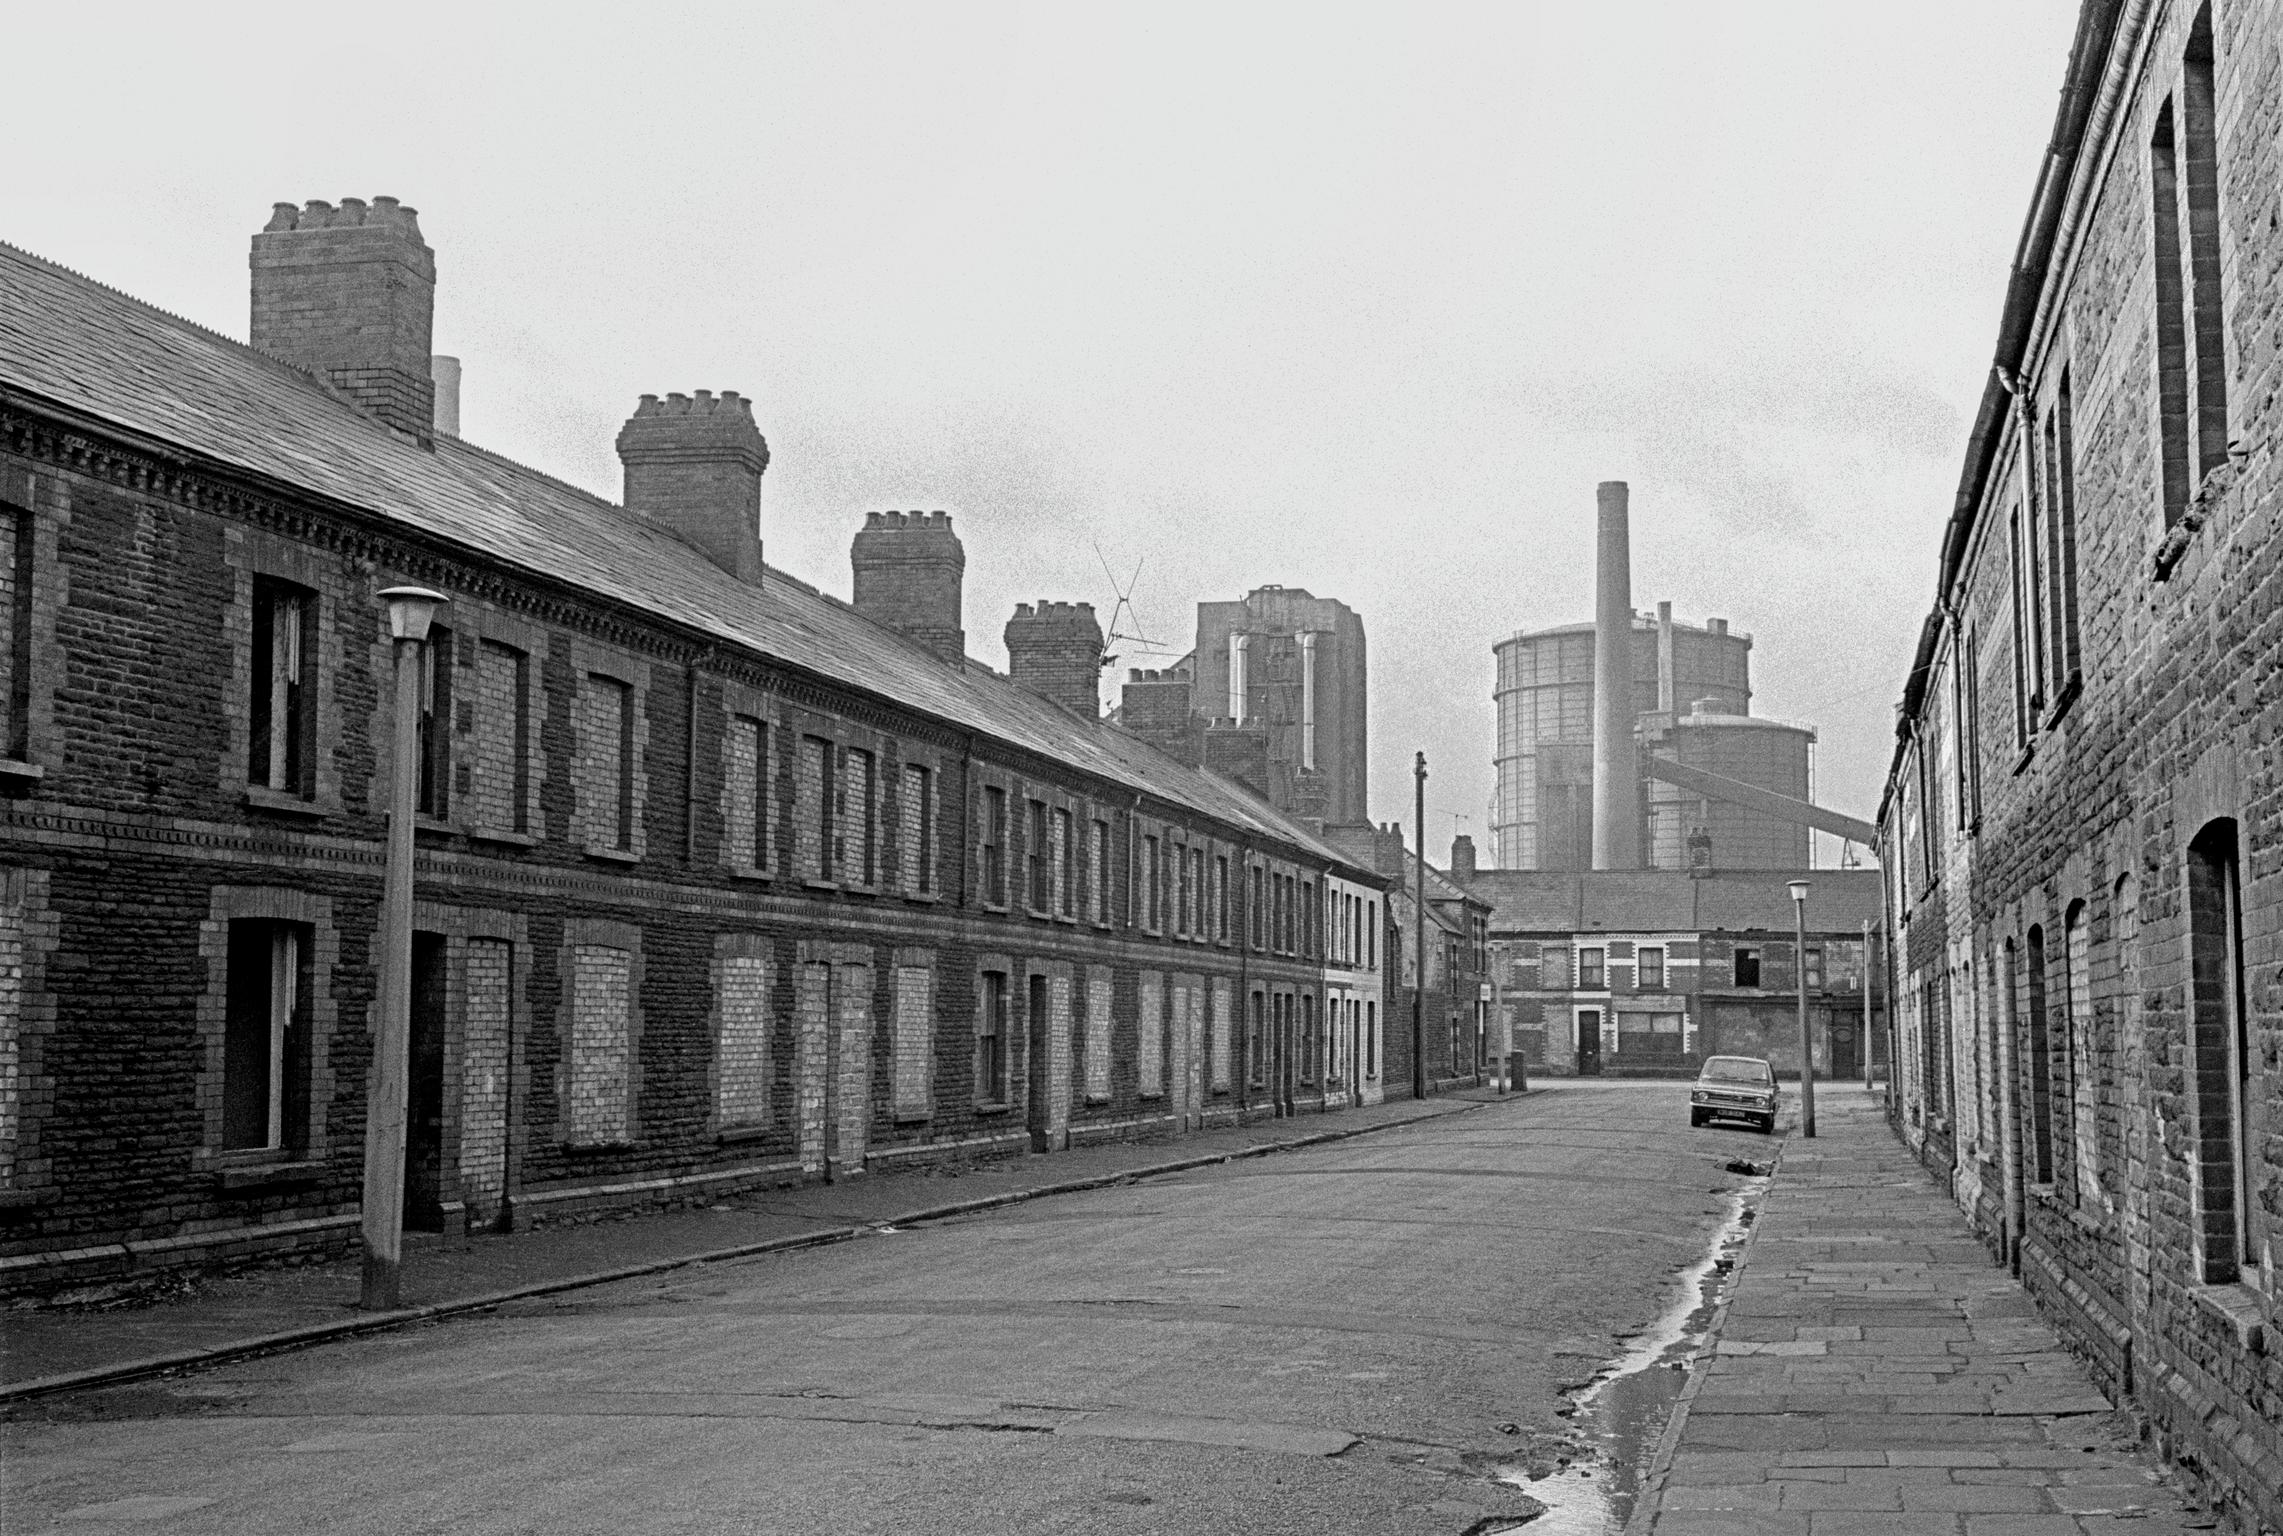 An unpopulated street near East Moors Steel Works during the closedown of the works. Cardiff, Wales